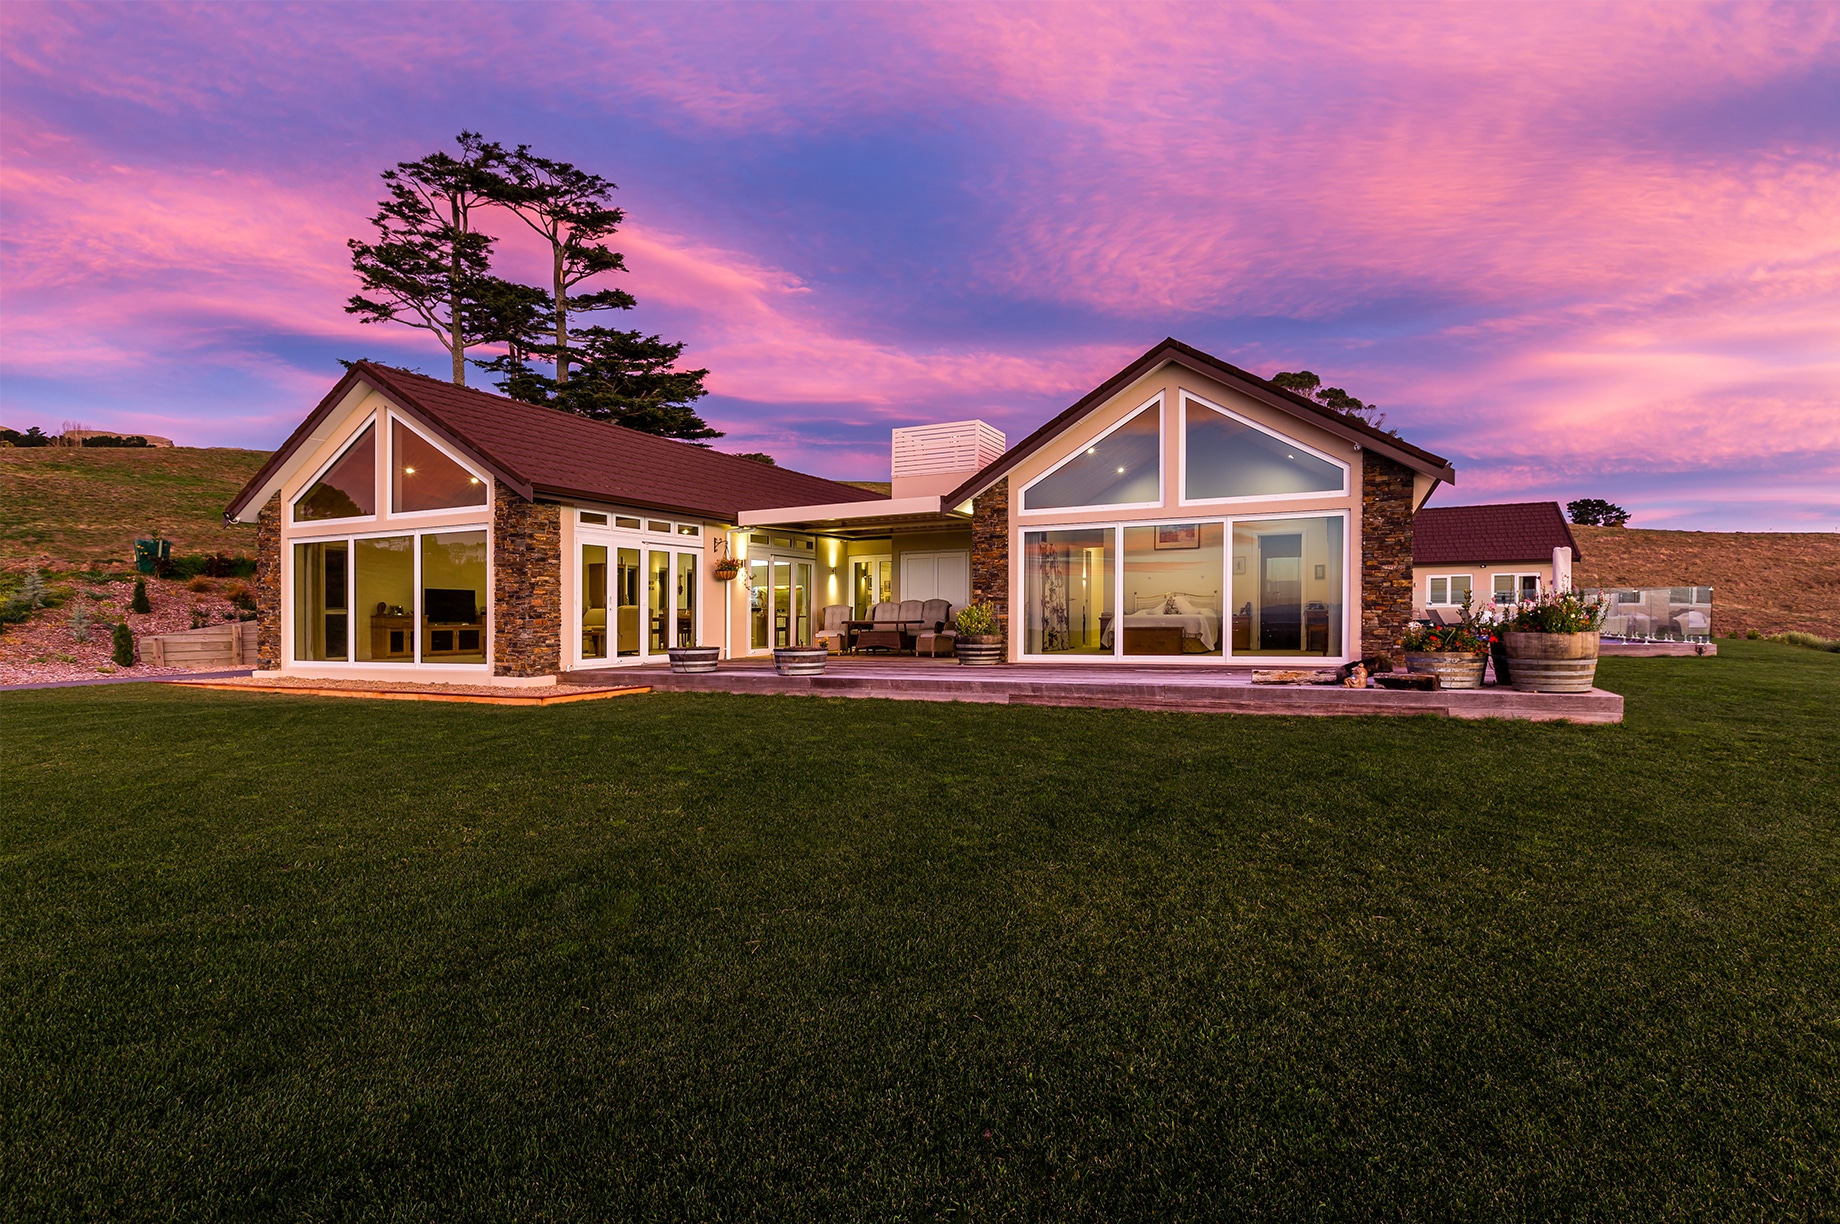 Rural home exterior during sunset